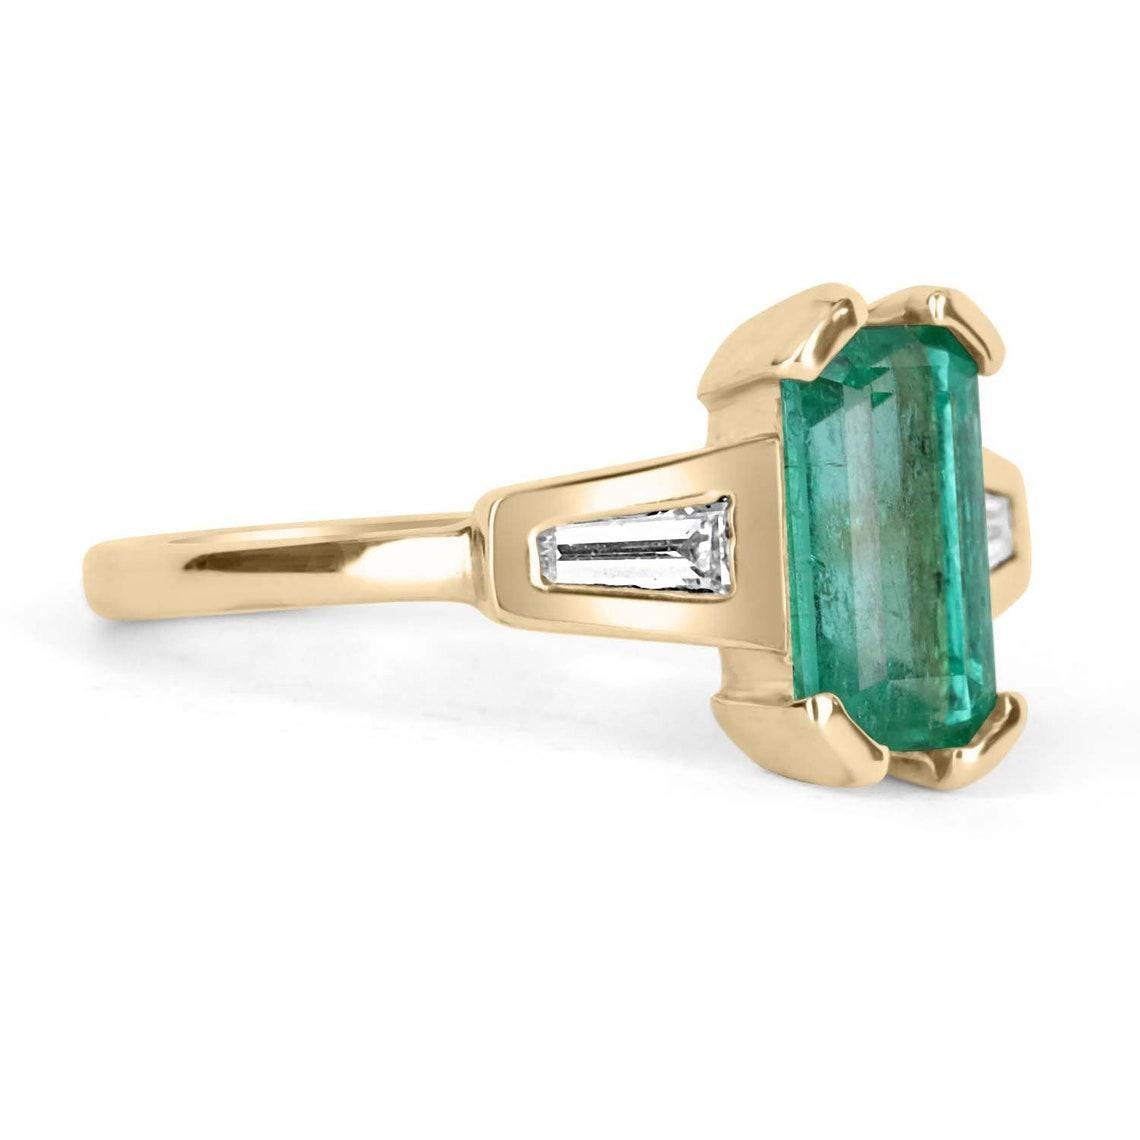 Featured is a stunning Colombian emerald and diamond, three-stone ring. A full 1.90-carats of pure, natural, Colombian beauty! This emerald displays a gorgeous, spring green color, with excellent eye clarity. On either side of this beauty, are